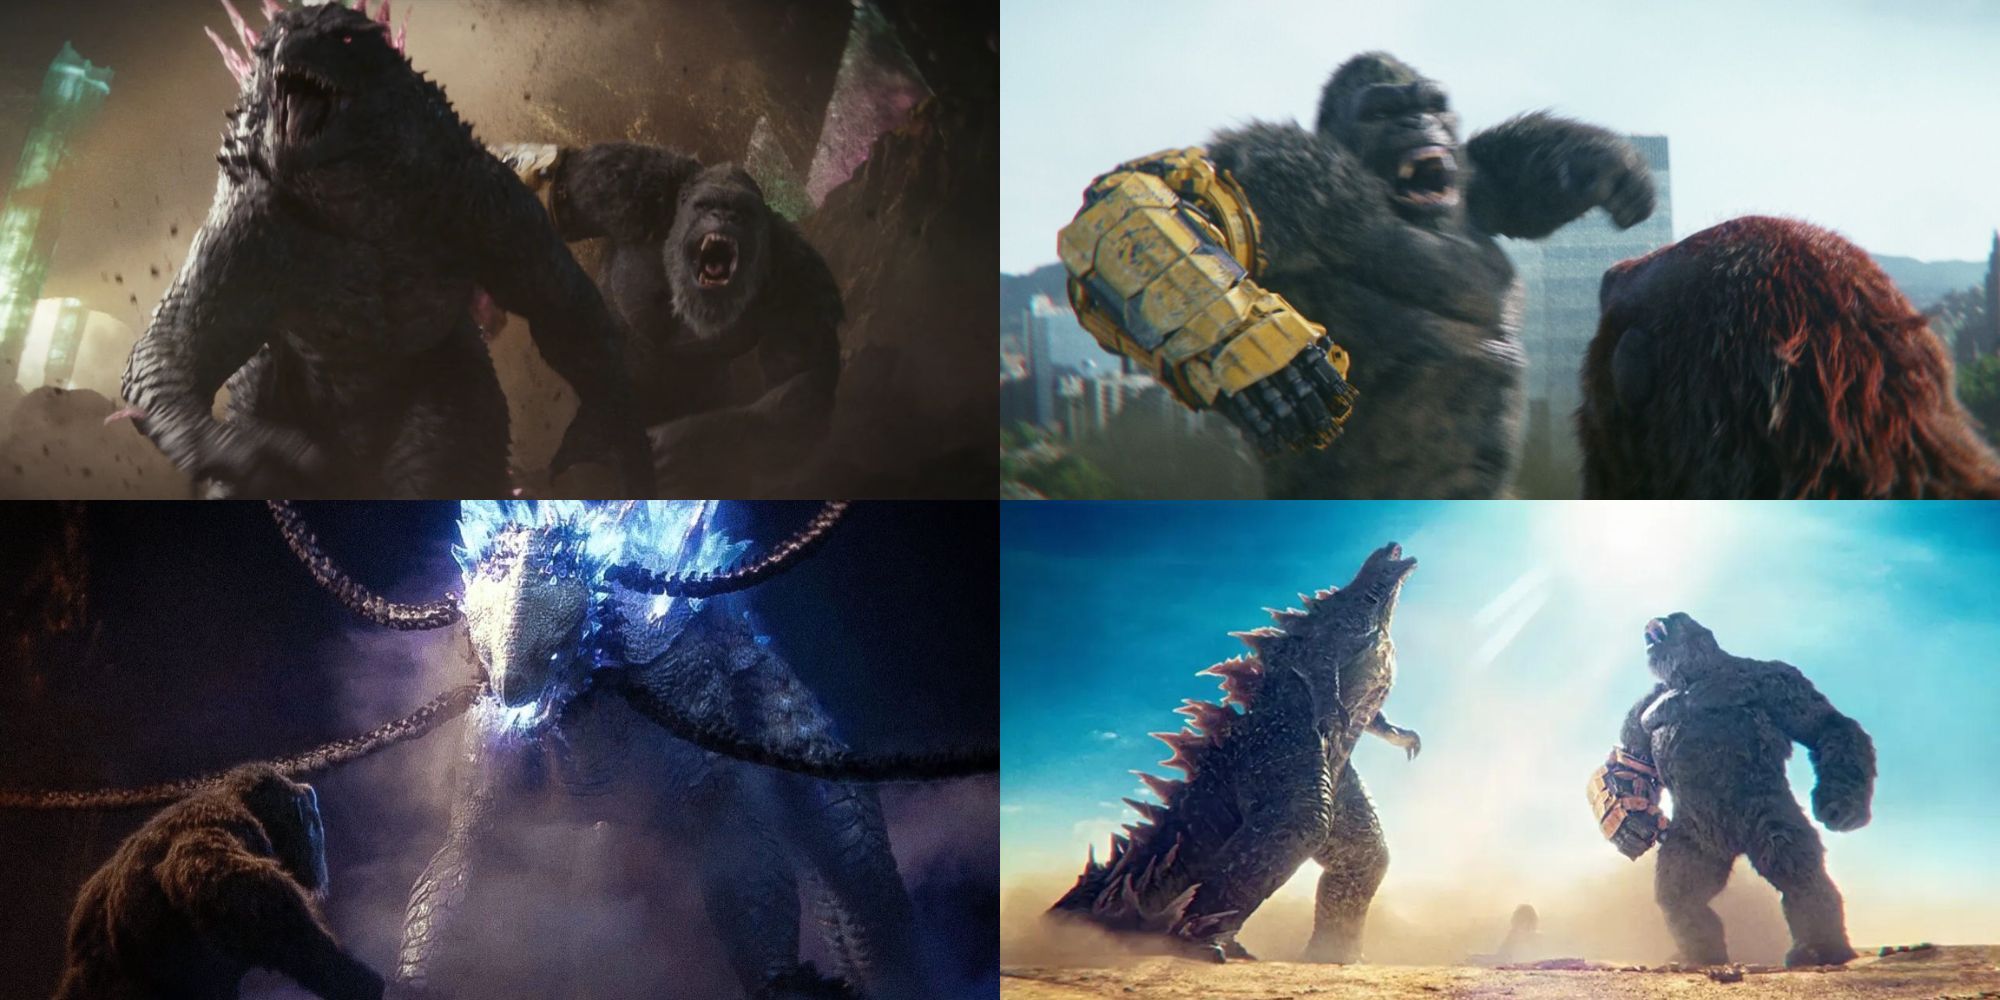 A collage with some of the best fights in Godzilla x Kong: Godzilla and Kong vs. Skar King and Shimo, Kong vs Skar King in Rio de Janeiro, Kong facing Shimo and Godzilla vs. Kong in Egypt.